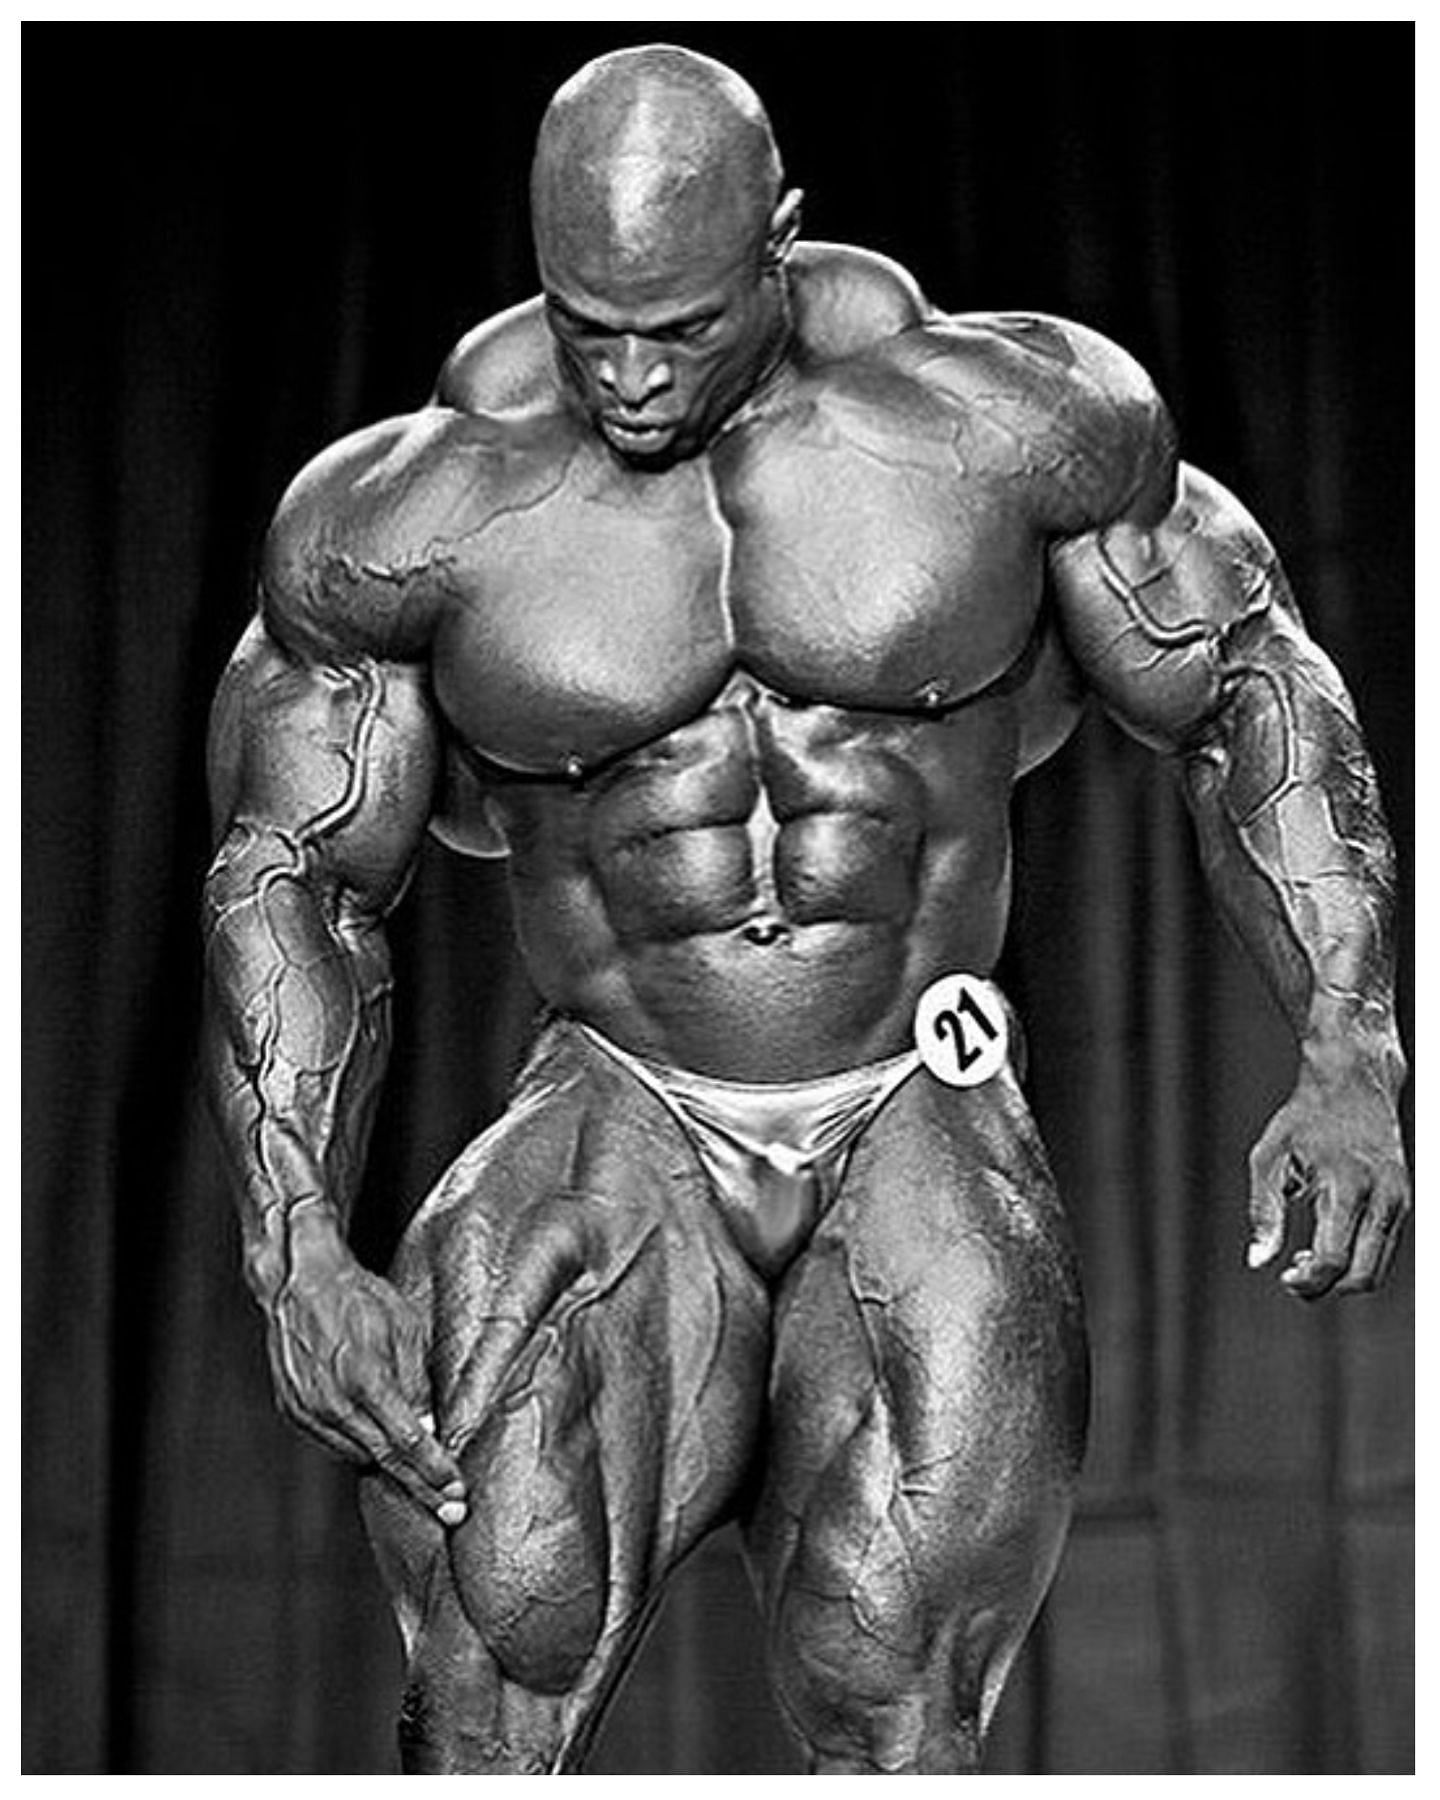 Coleman poses on stage to retain the Mr. Olympia title: Image via Instagram (@ronniecoleman8)